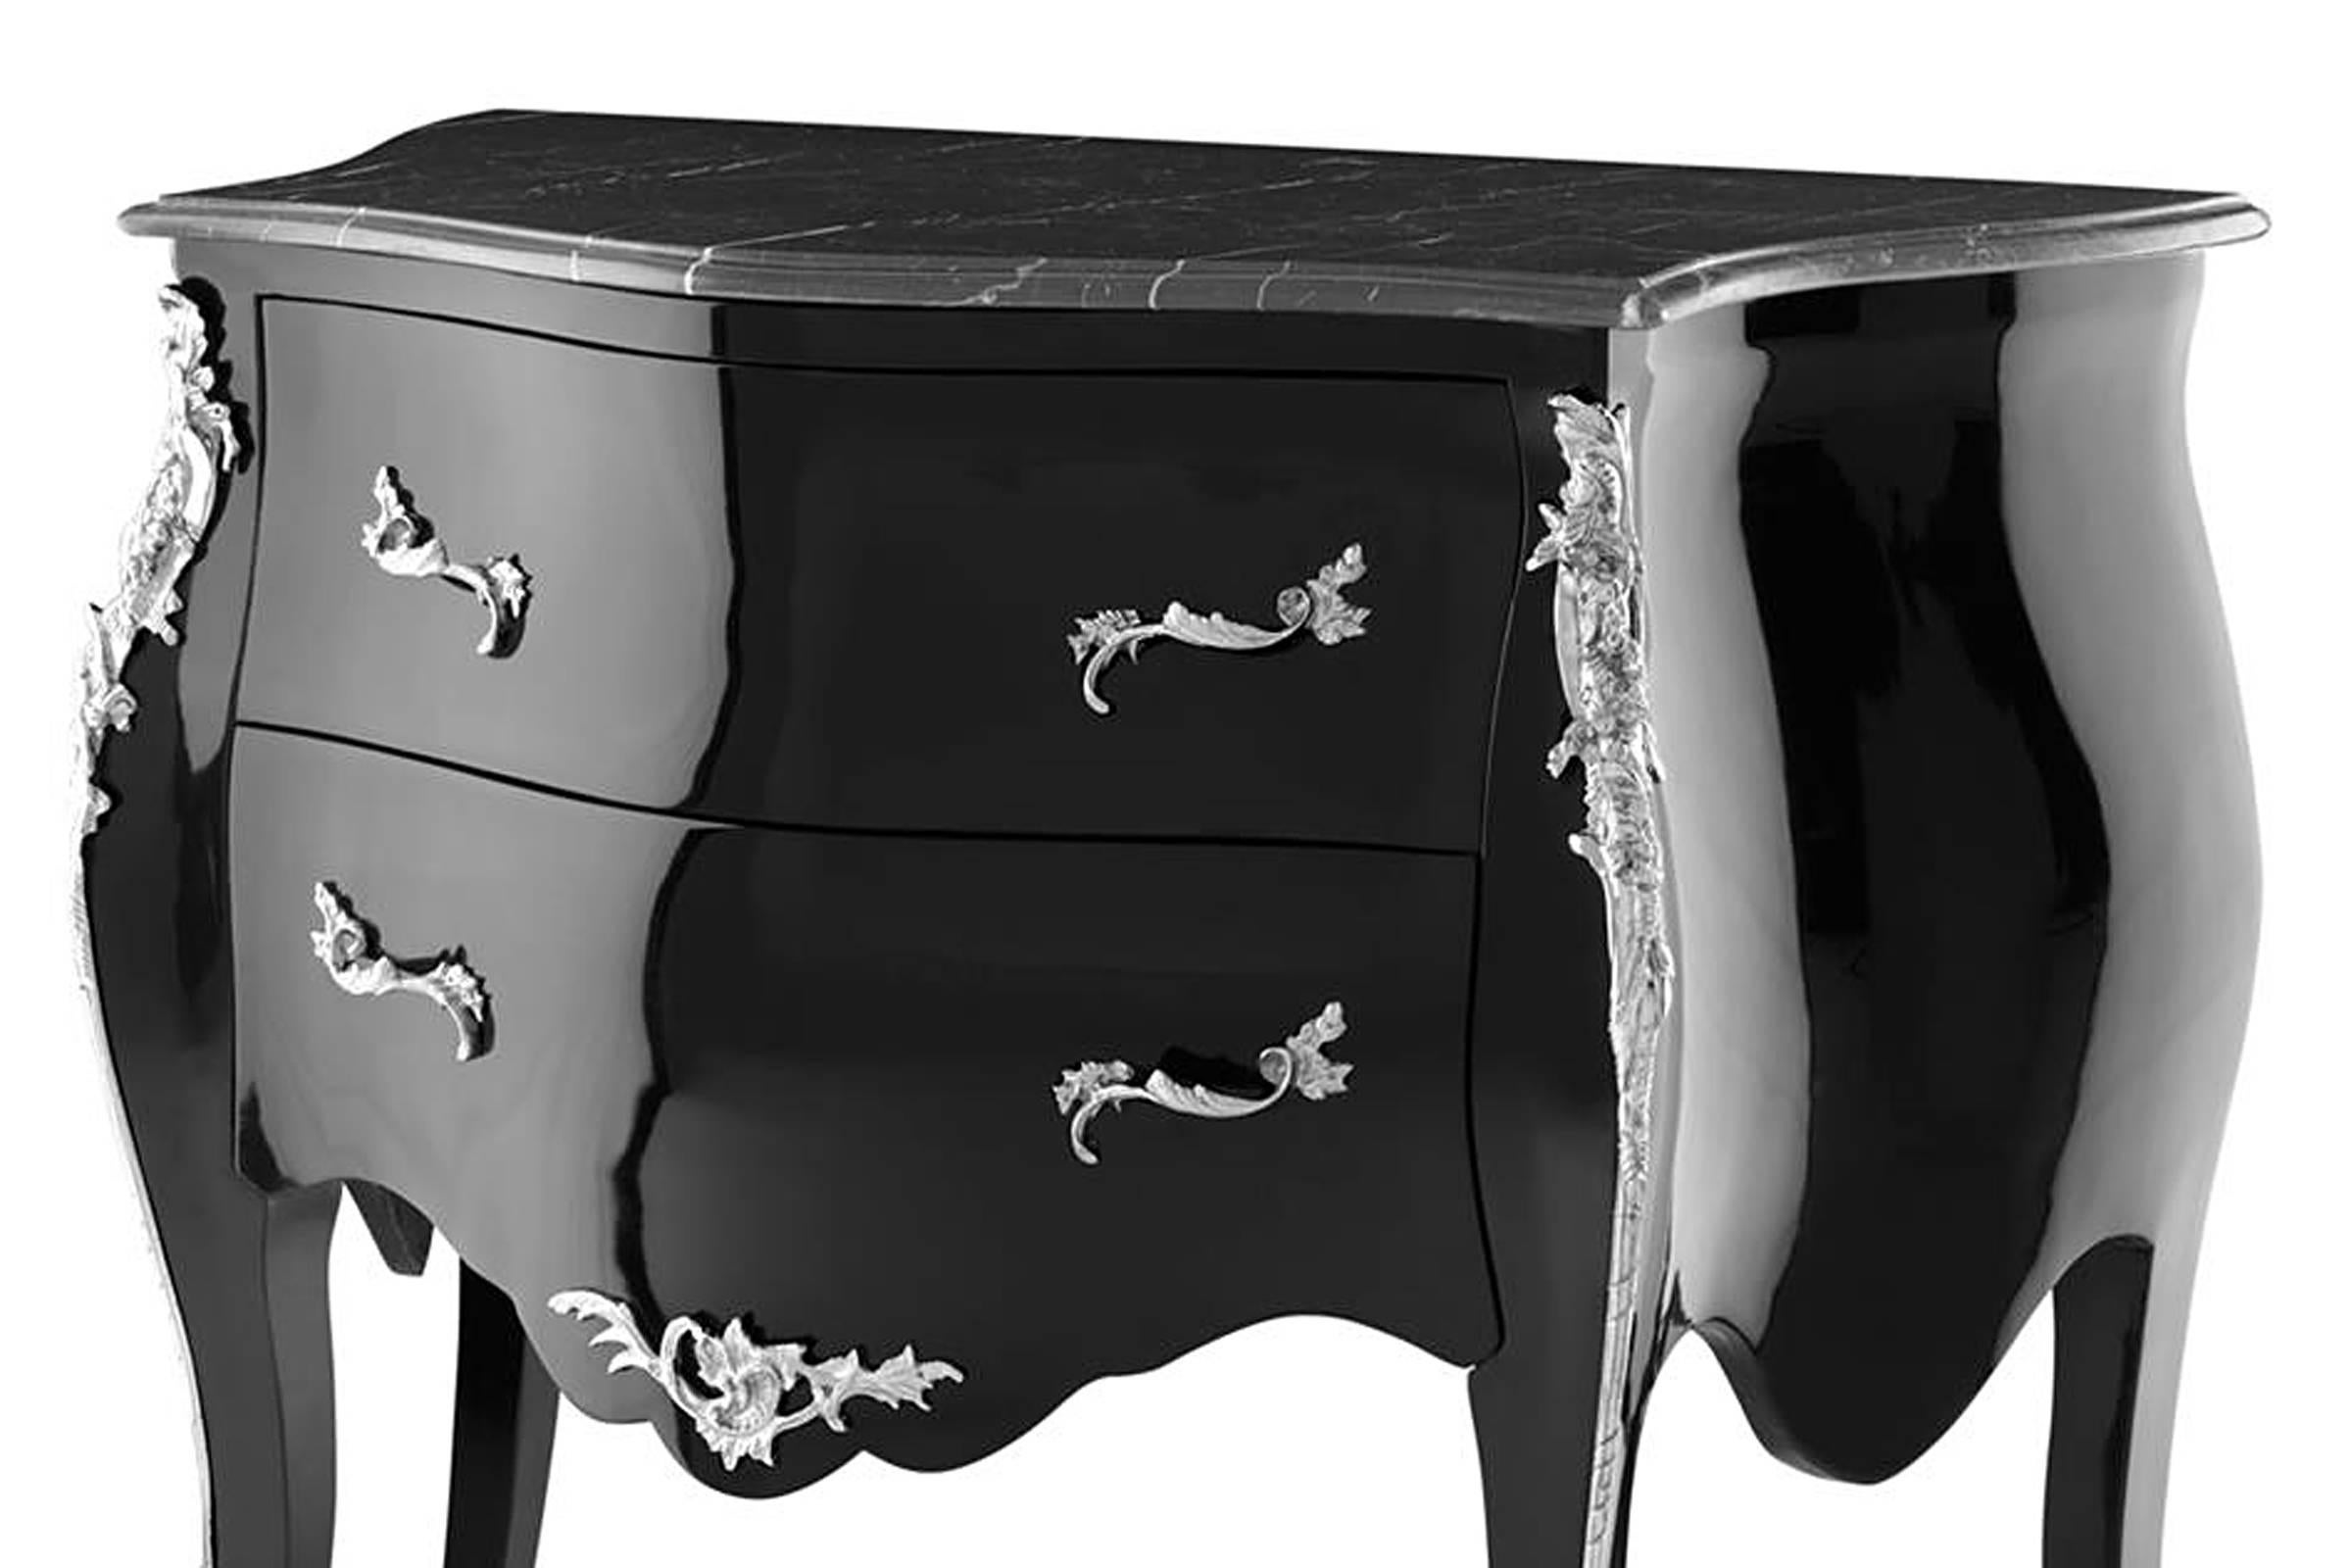 Chest Loire in black lacquered 
pine wood, nickel details finish and
black marble top. Available in side 
table. 